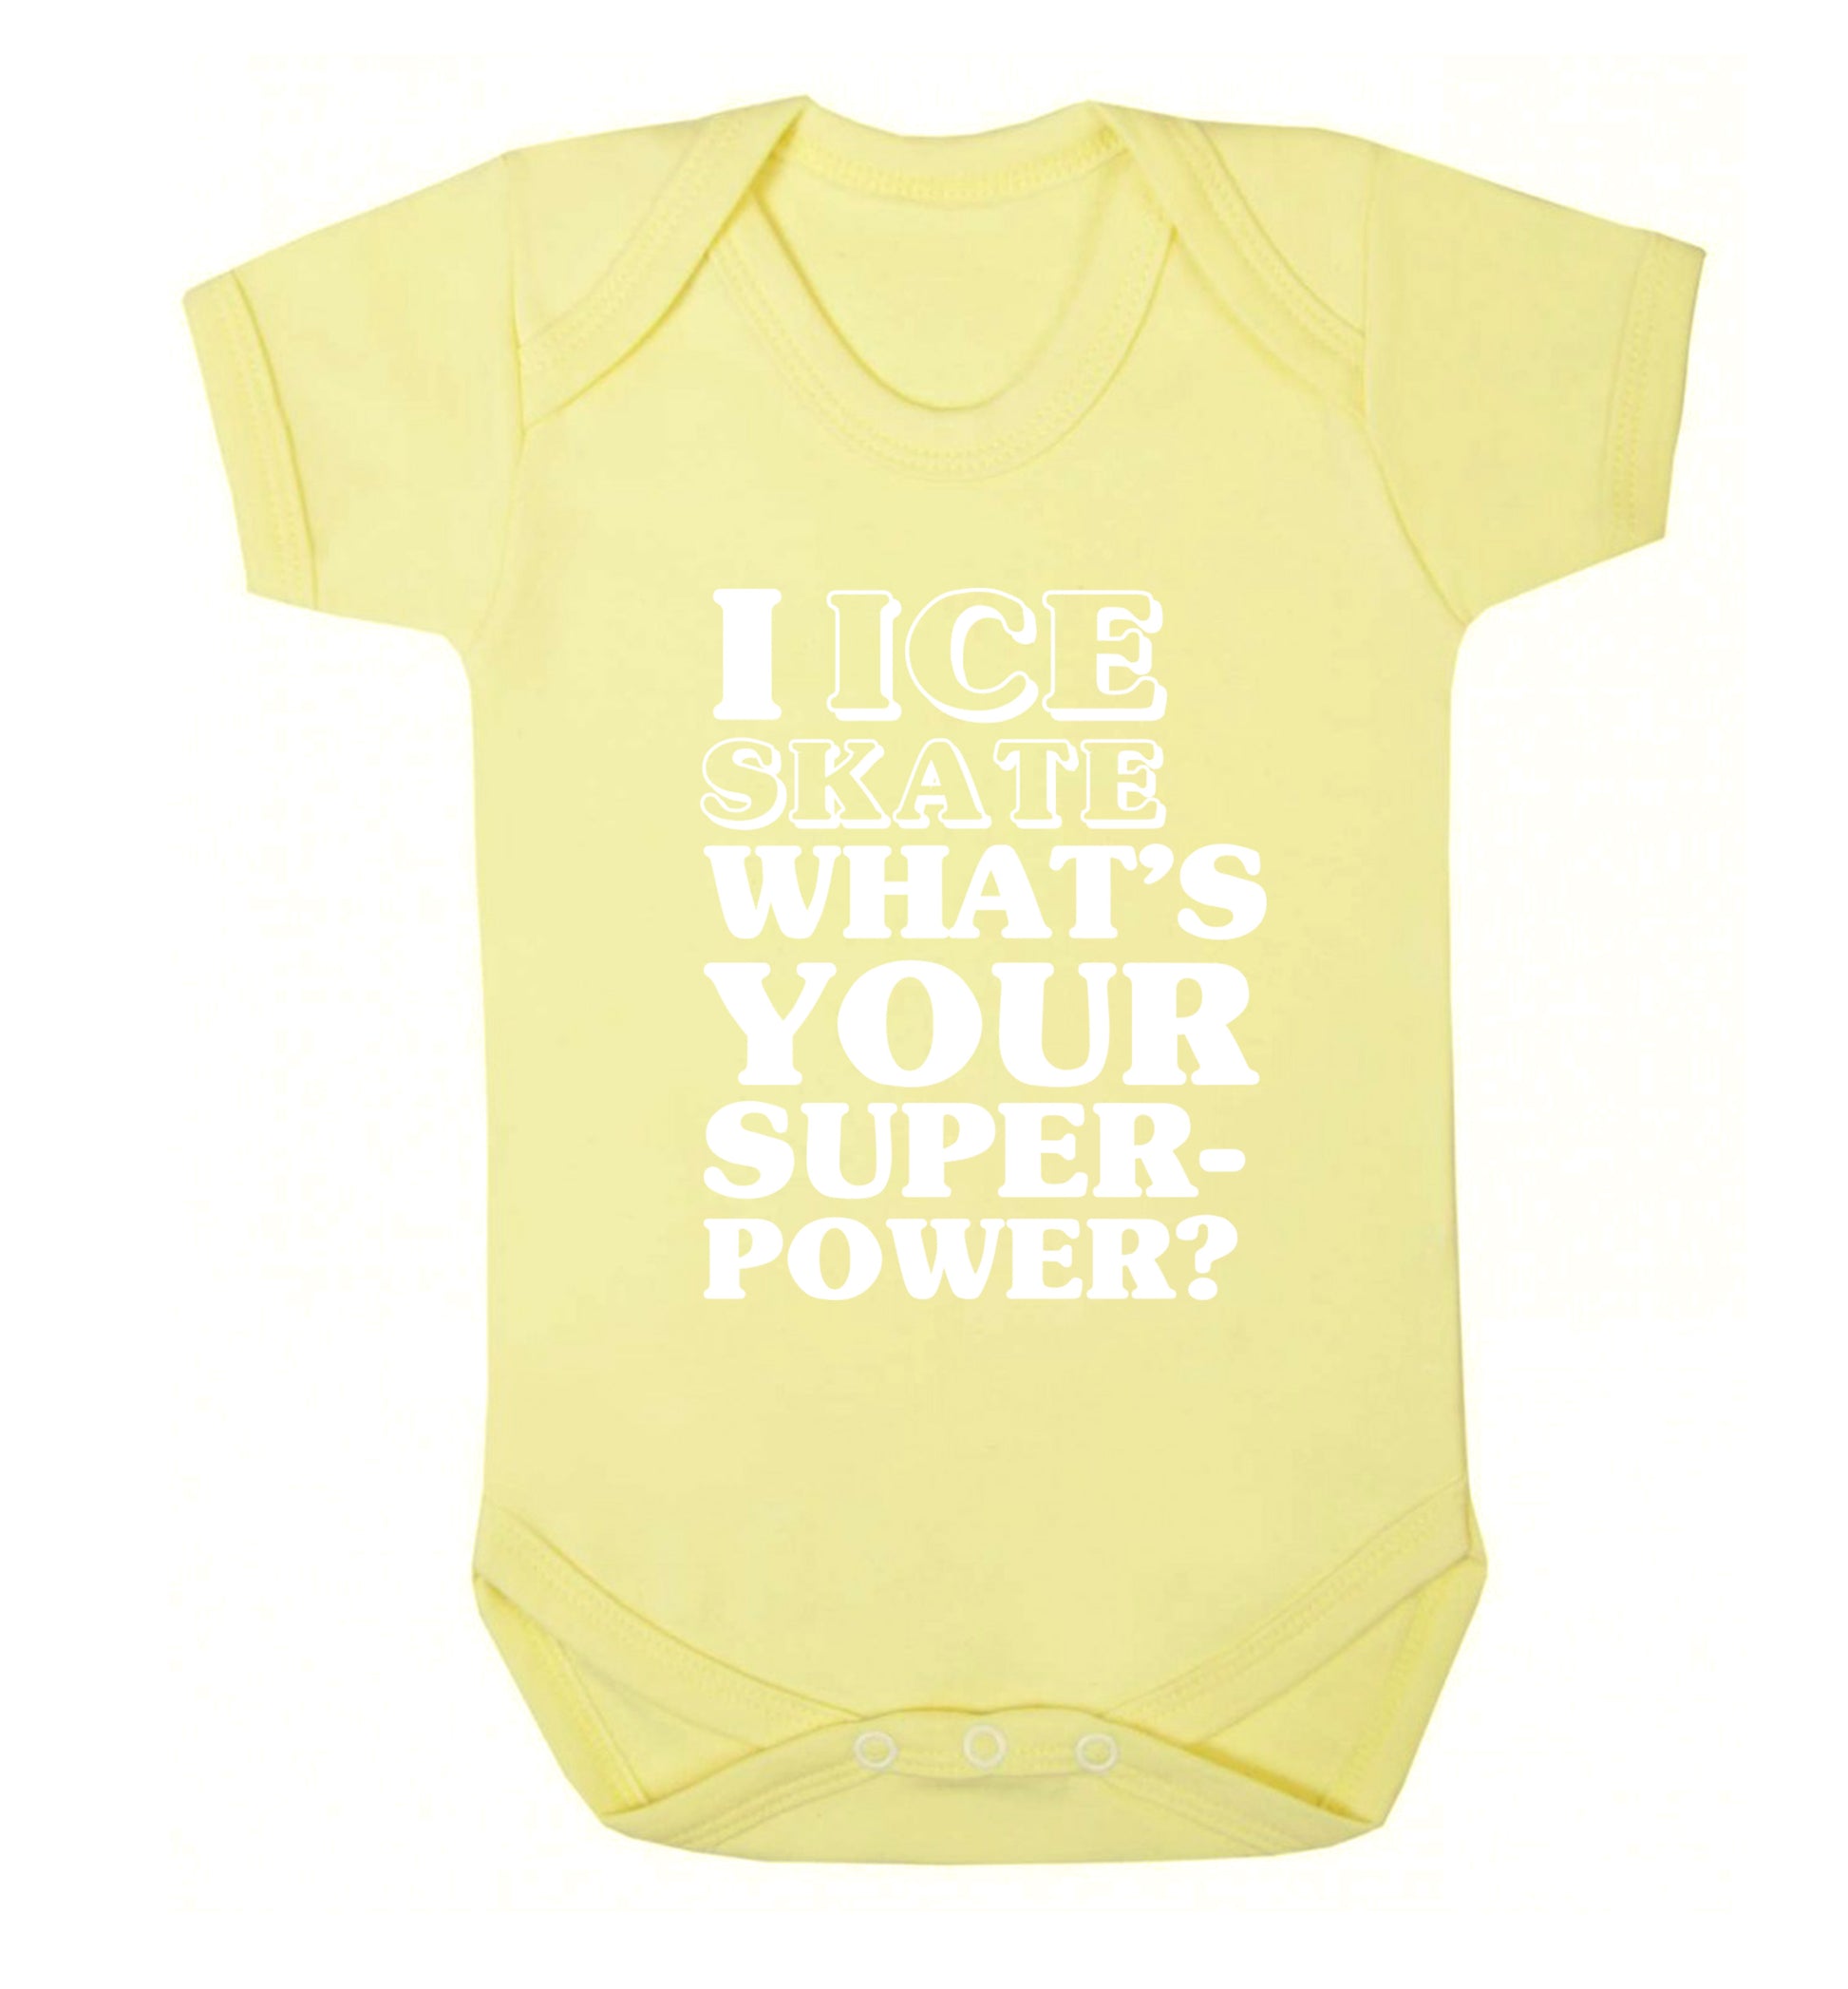 I ice skate what's your superpower? Baby Vest pale yellow 18-24 months